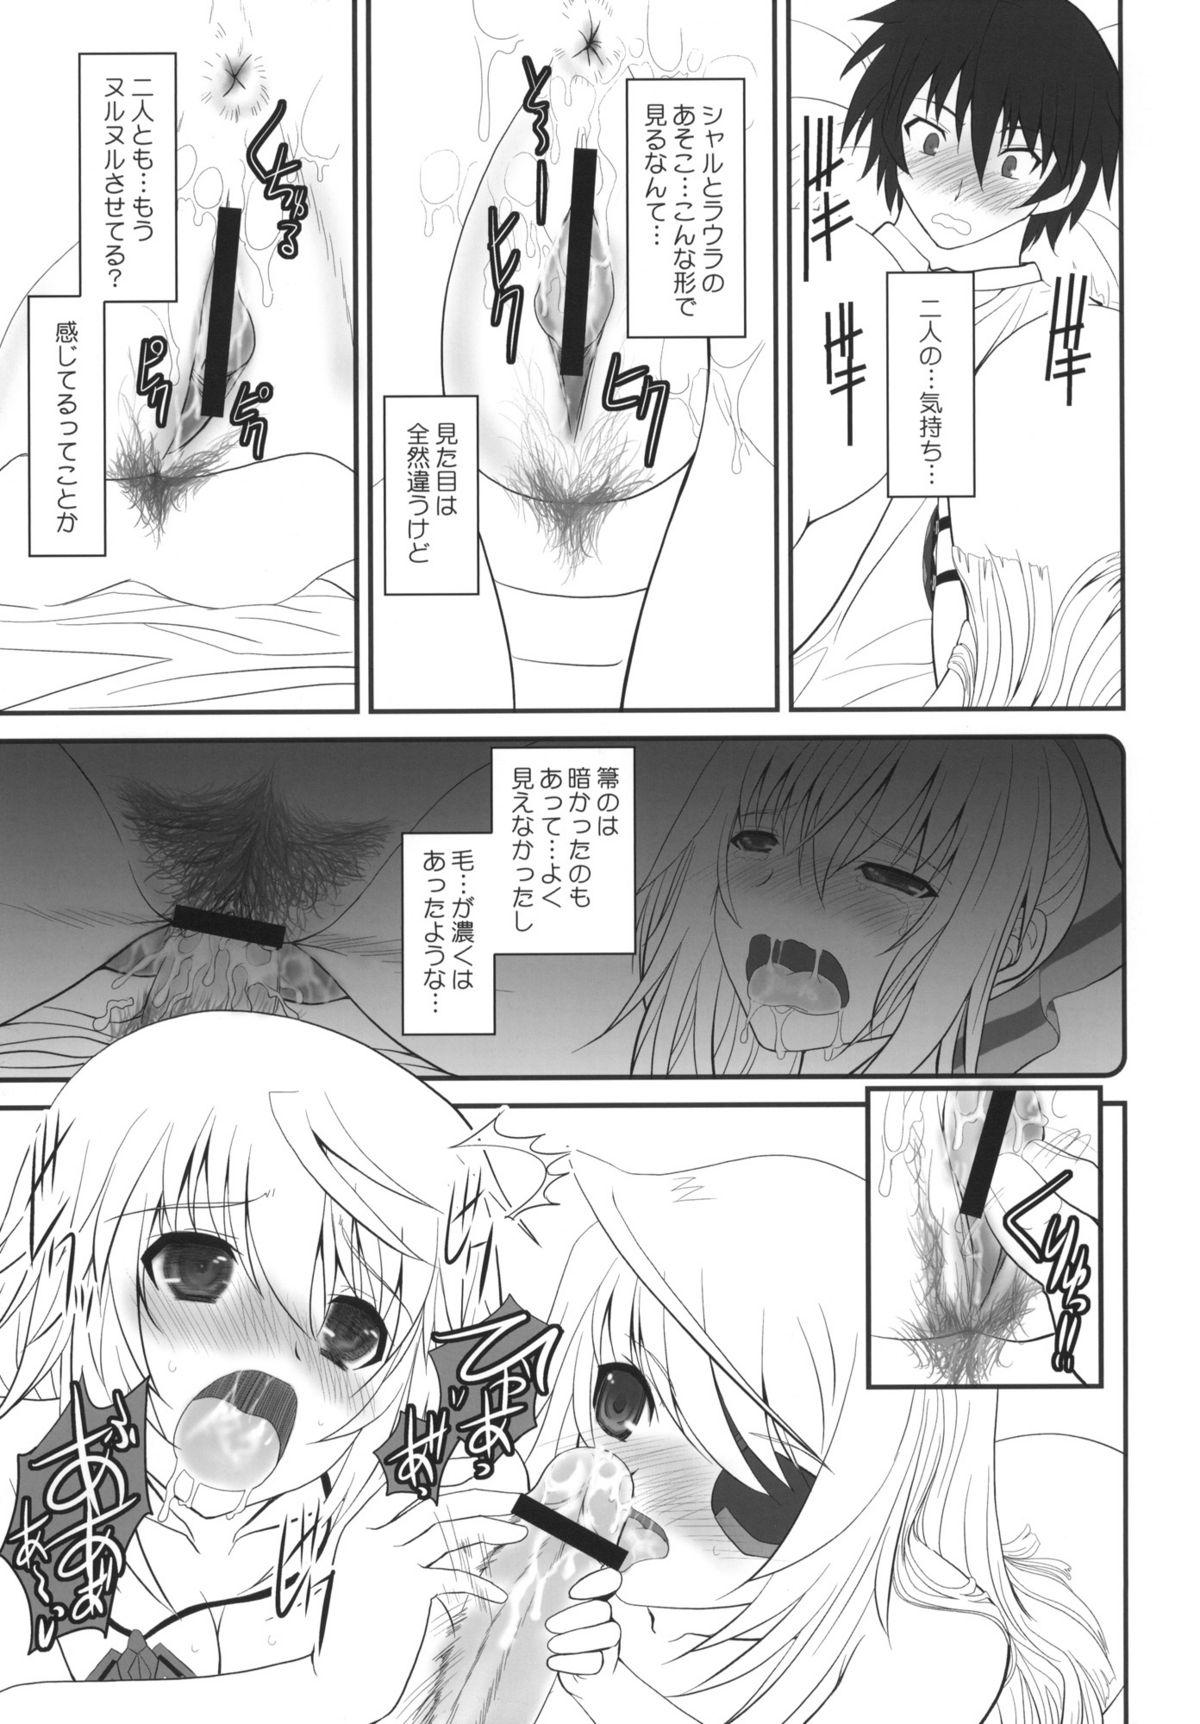 Mulher IS-LAND - Infinite stratos Cream - Page 10